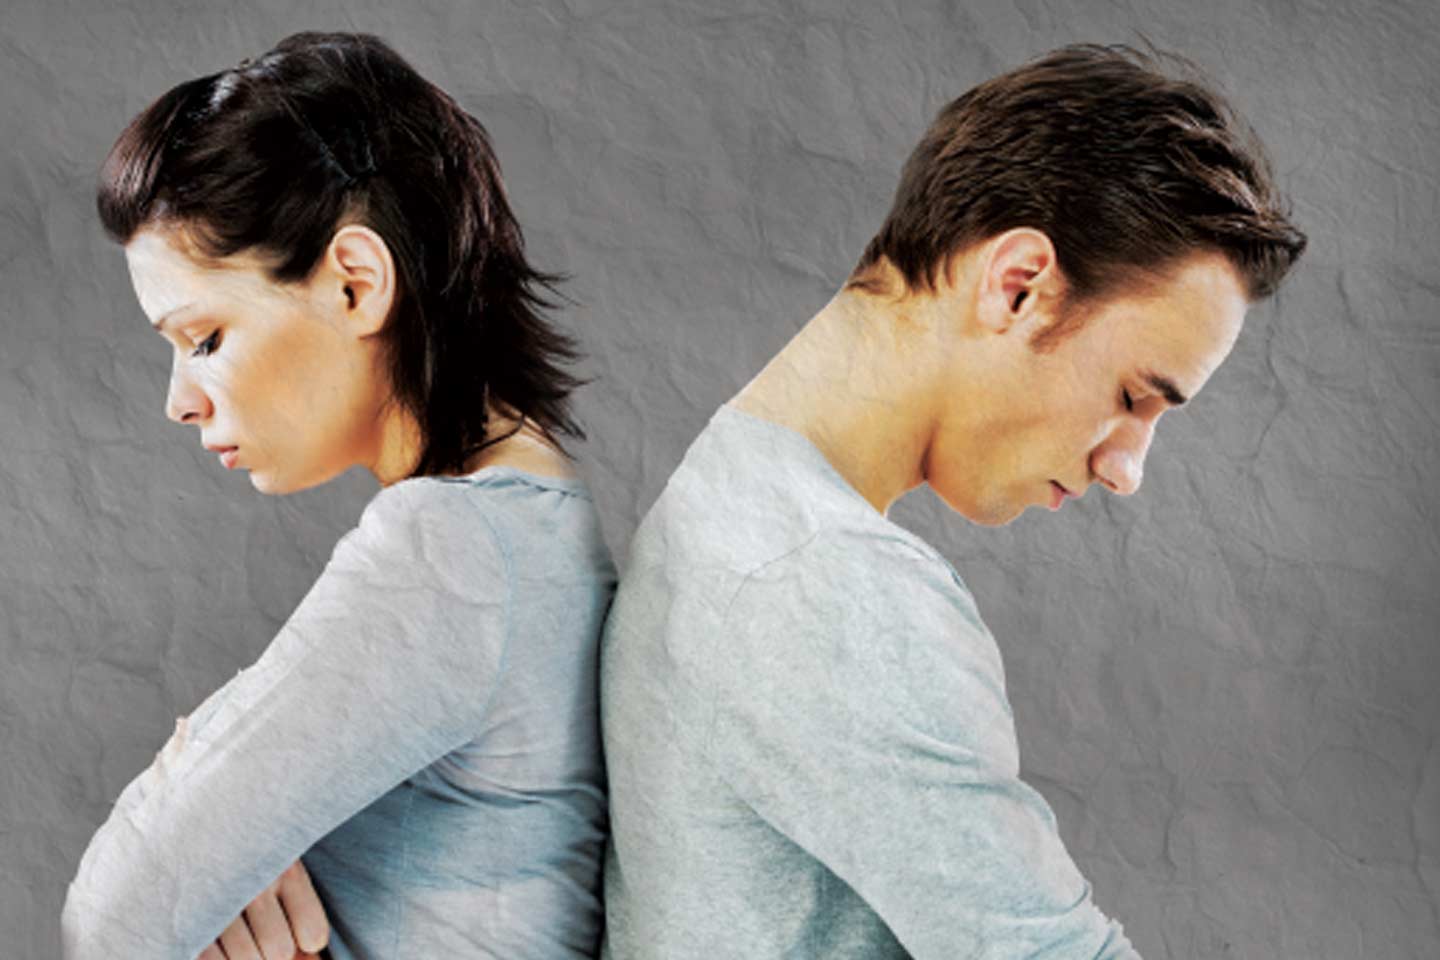 Woman and man with their backs against each other and their heads down